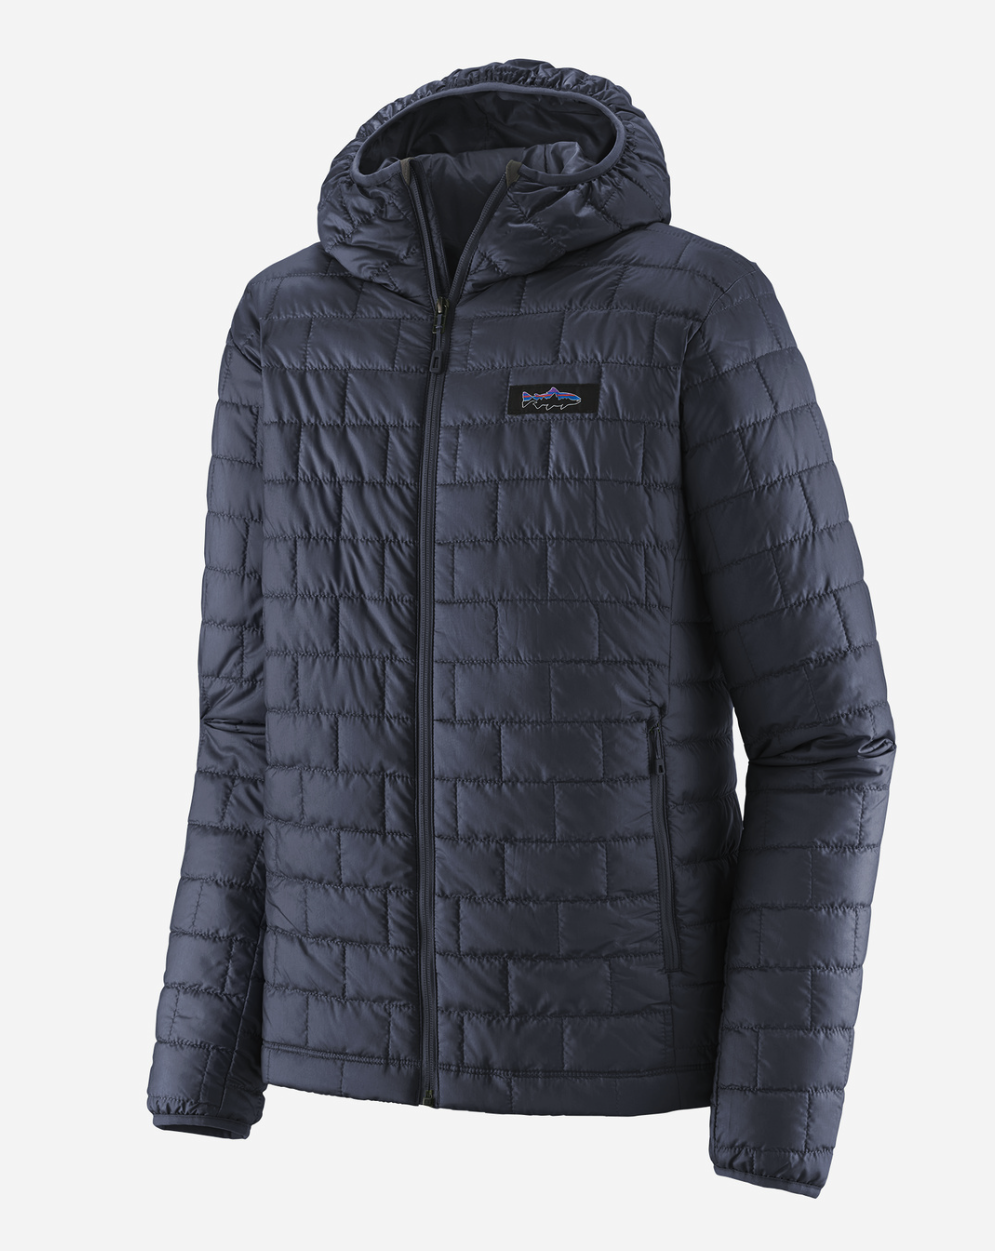 Patagonia Nano Puff Fitz Roy Trout Hoody For Sale Online Smolder Blue